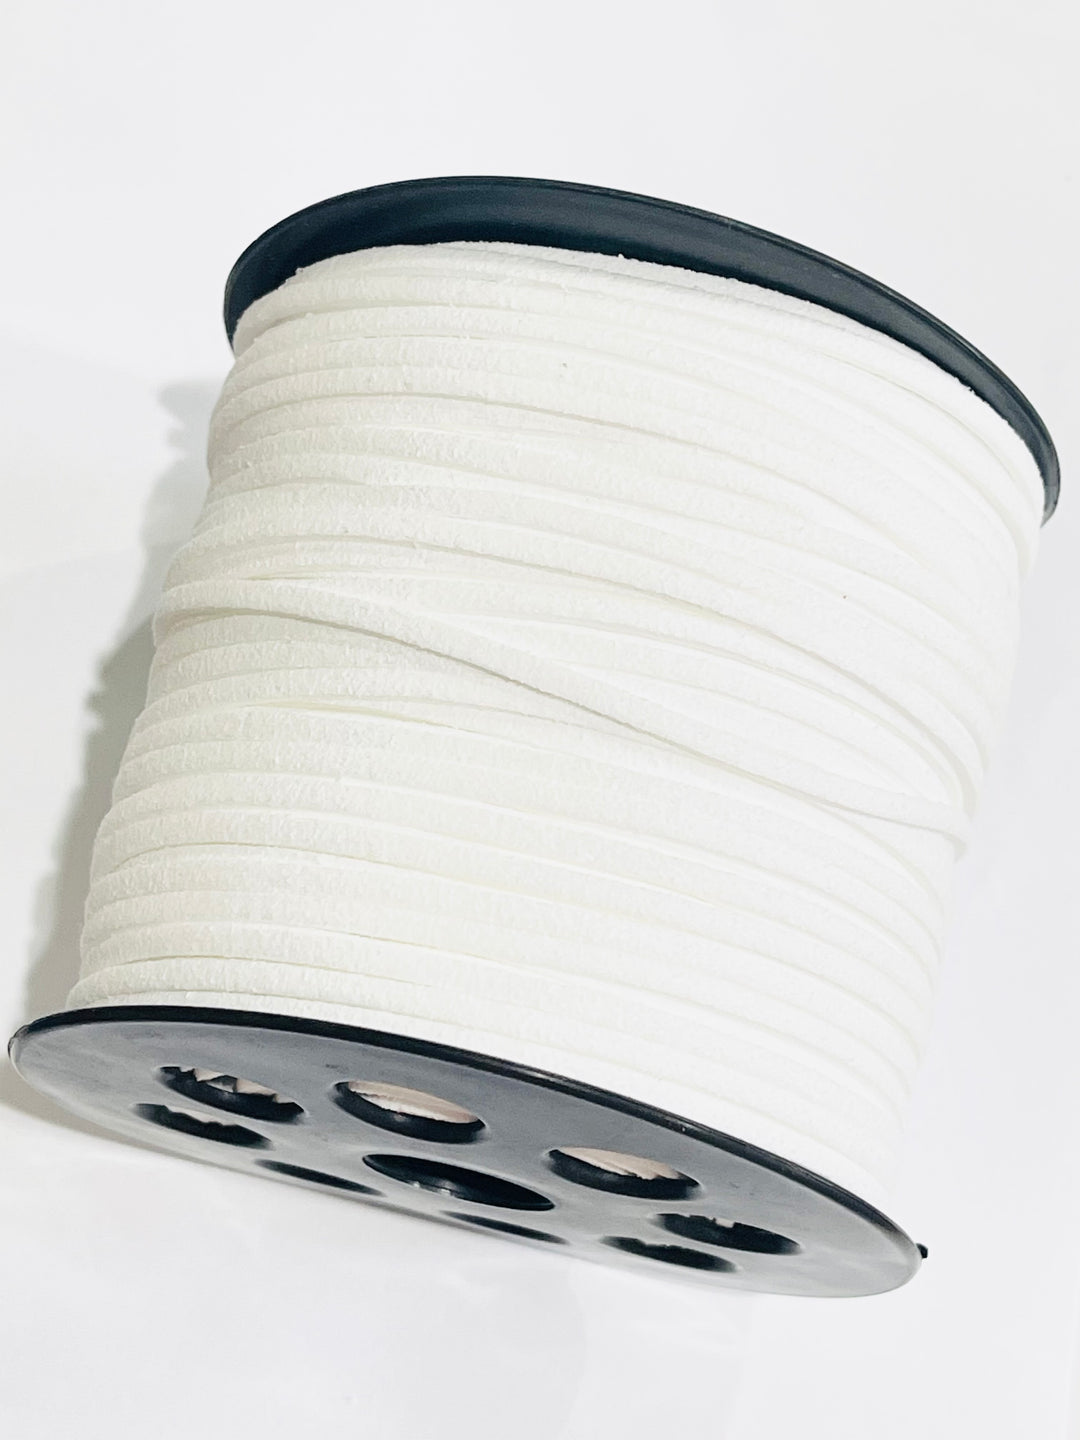 White Faux Suede Cord - 5m - White Suede Cord